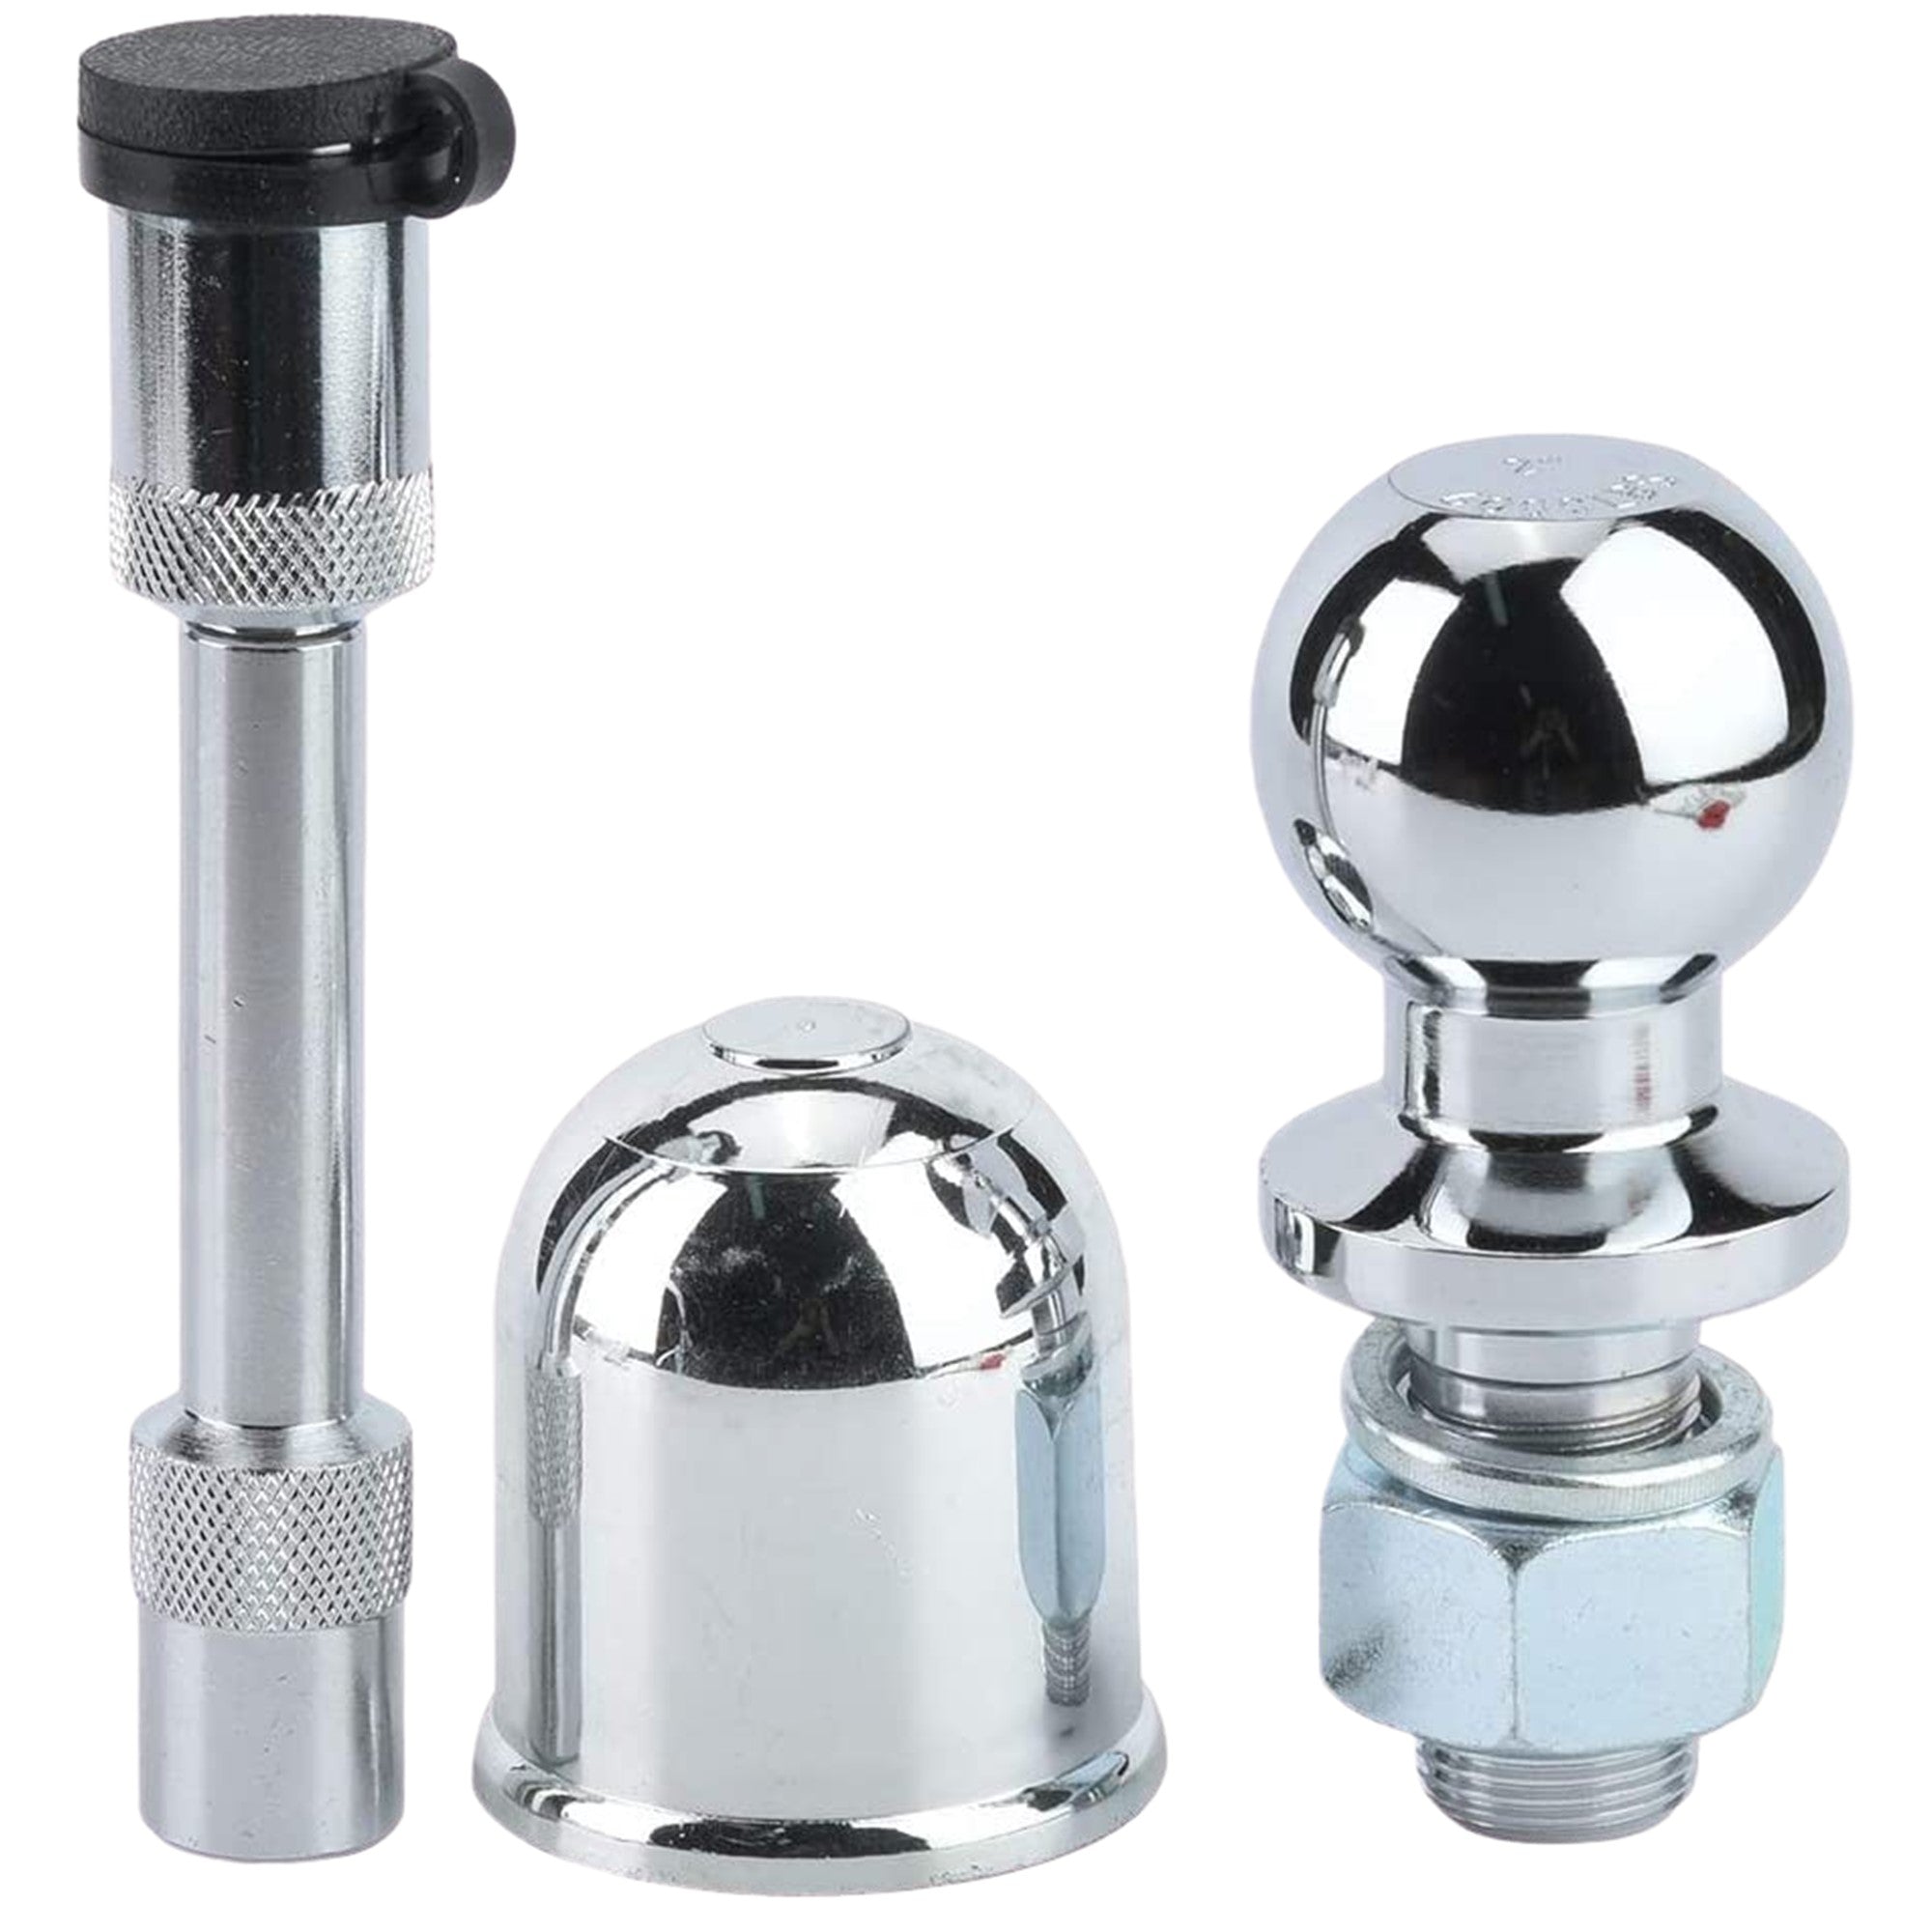 Hardened steel and aluminum for maximum protection and hitch ball cover Designed to fit the standard 50mm towball